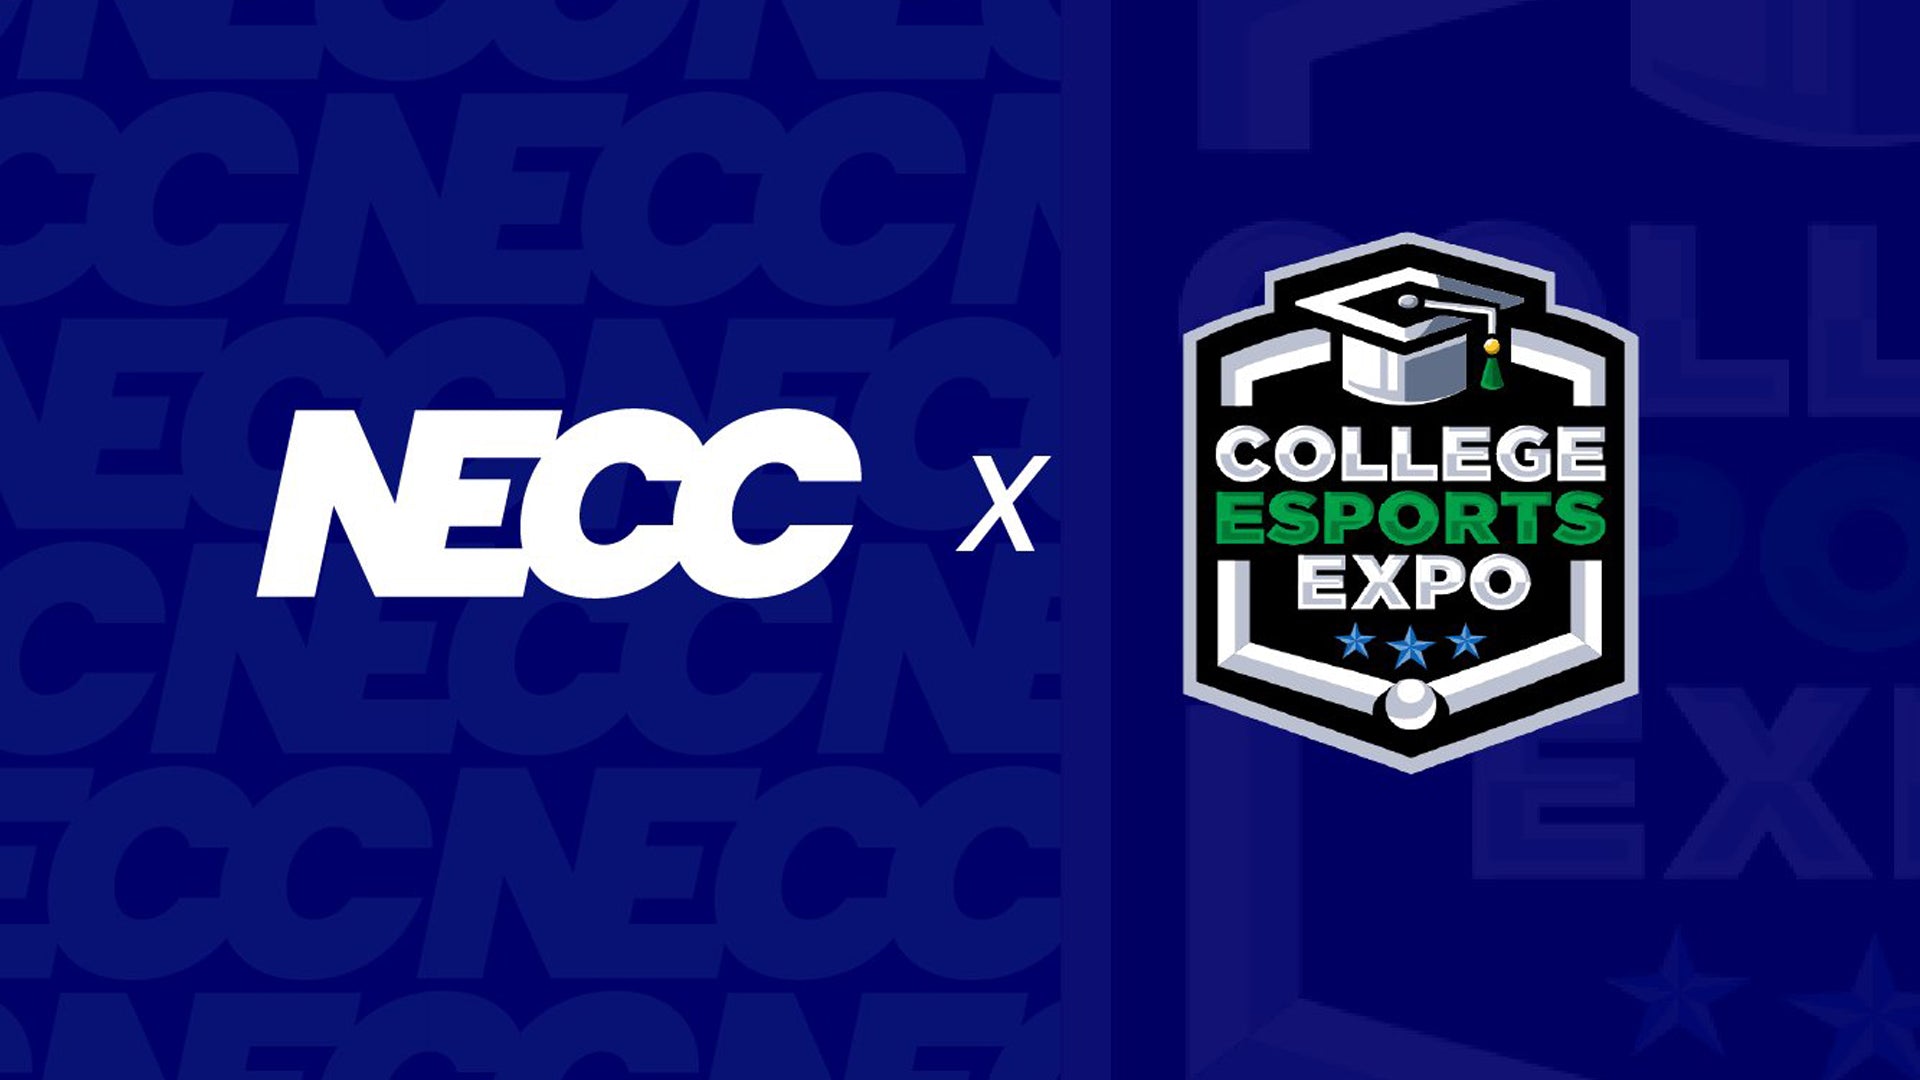 NECC Announces More Details of Partnership with College Esports Expo